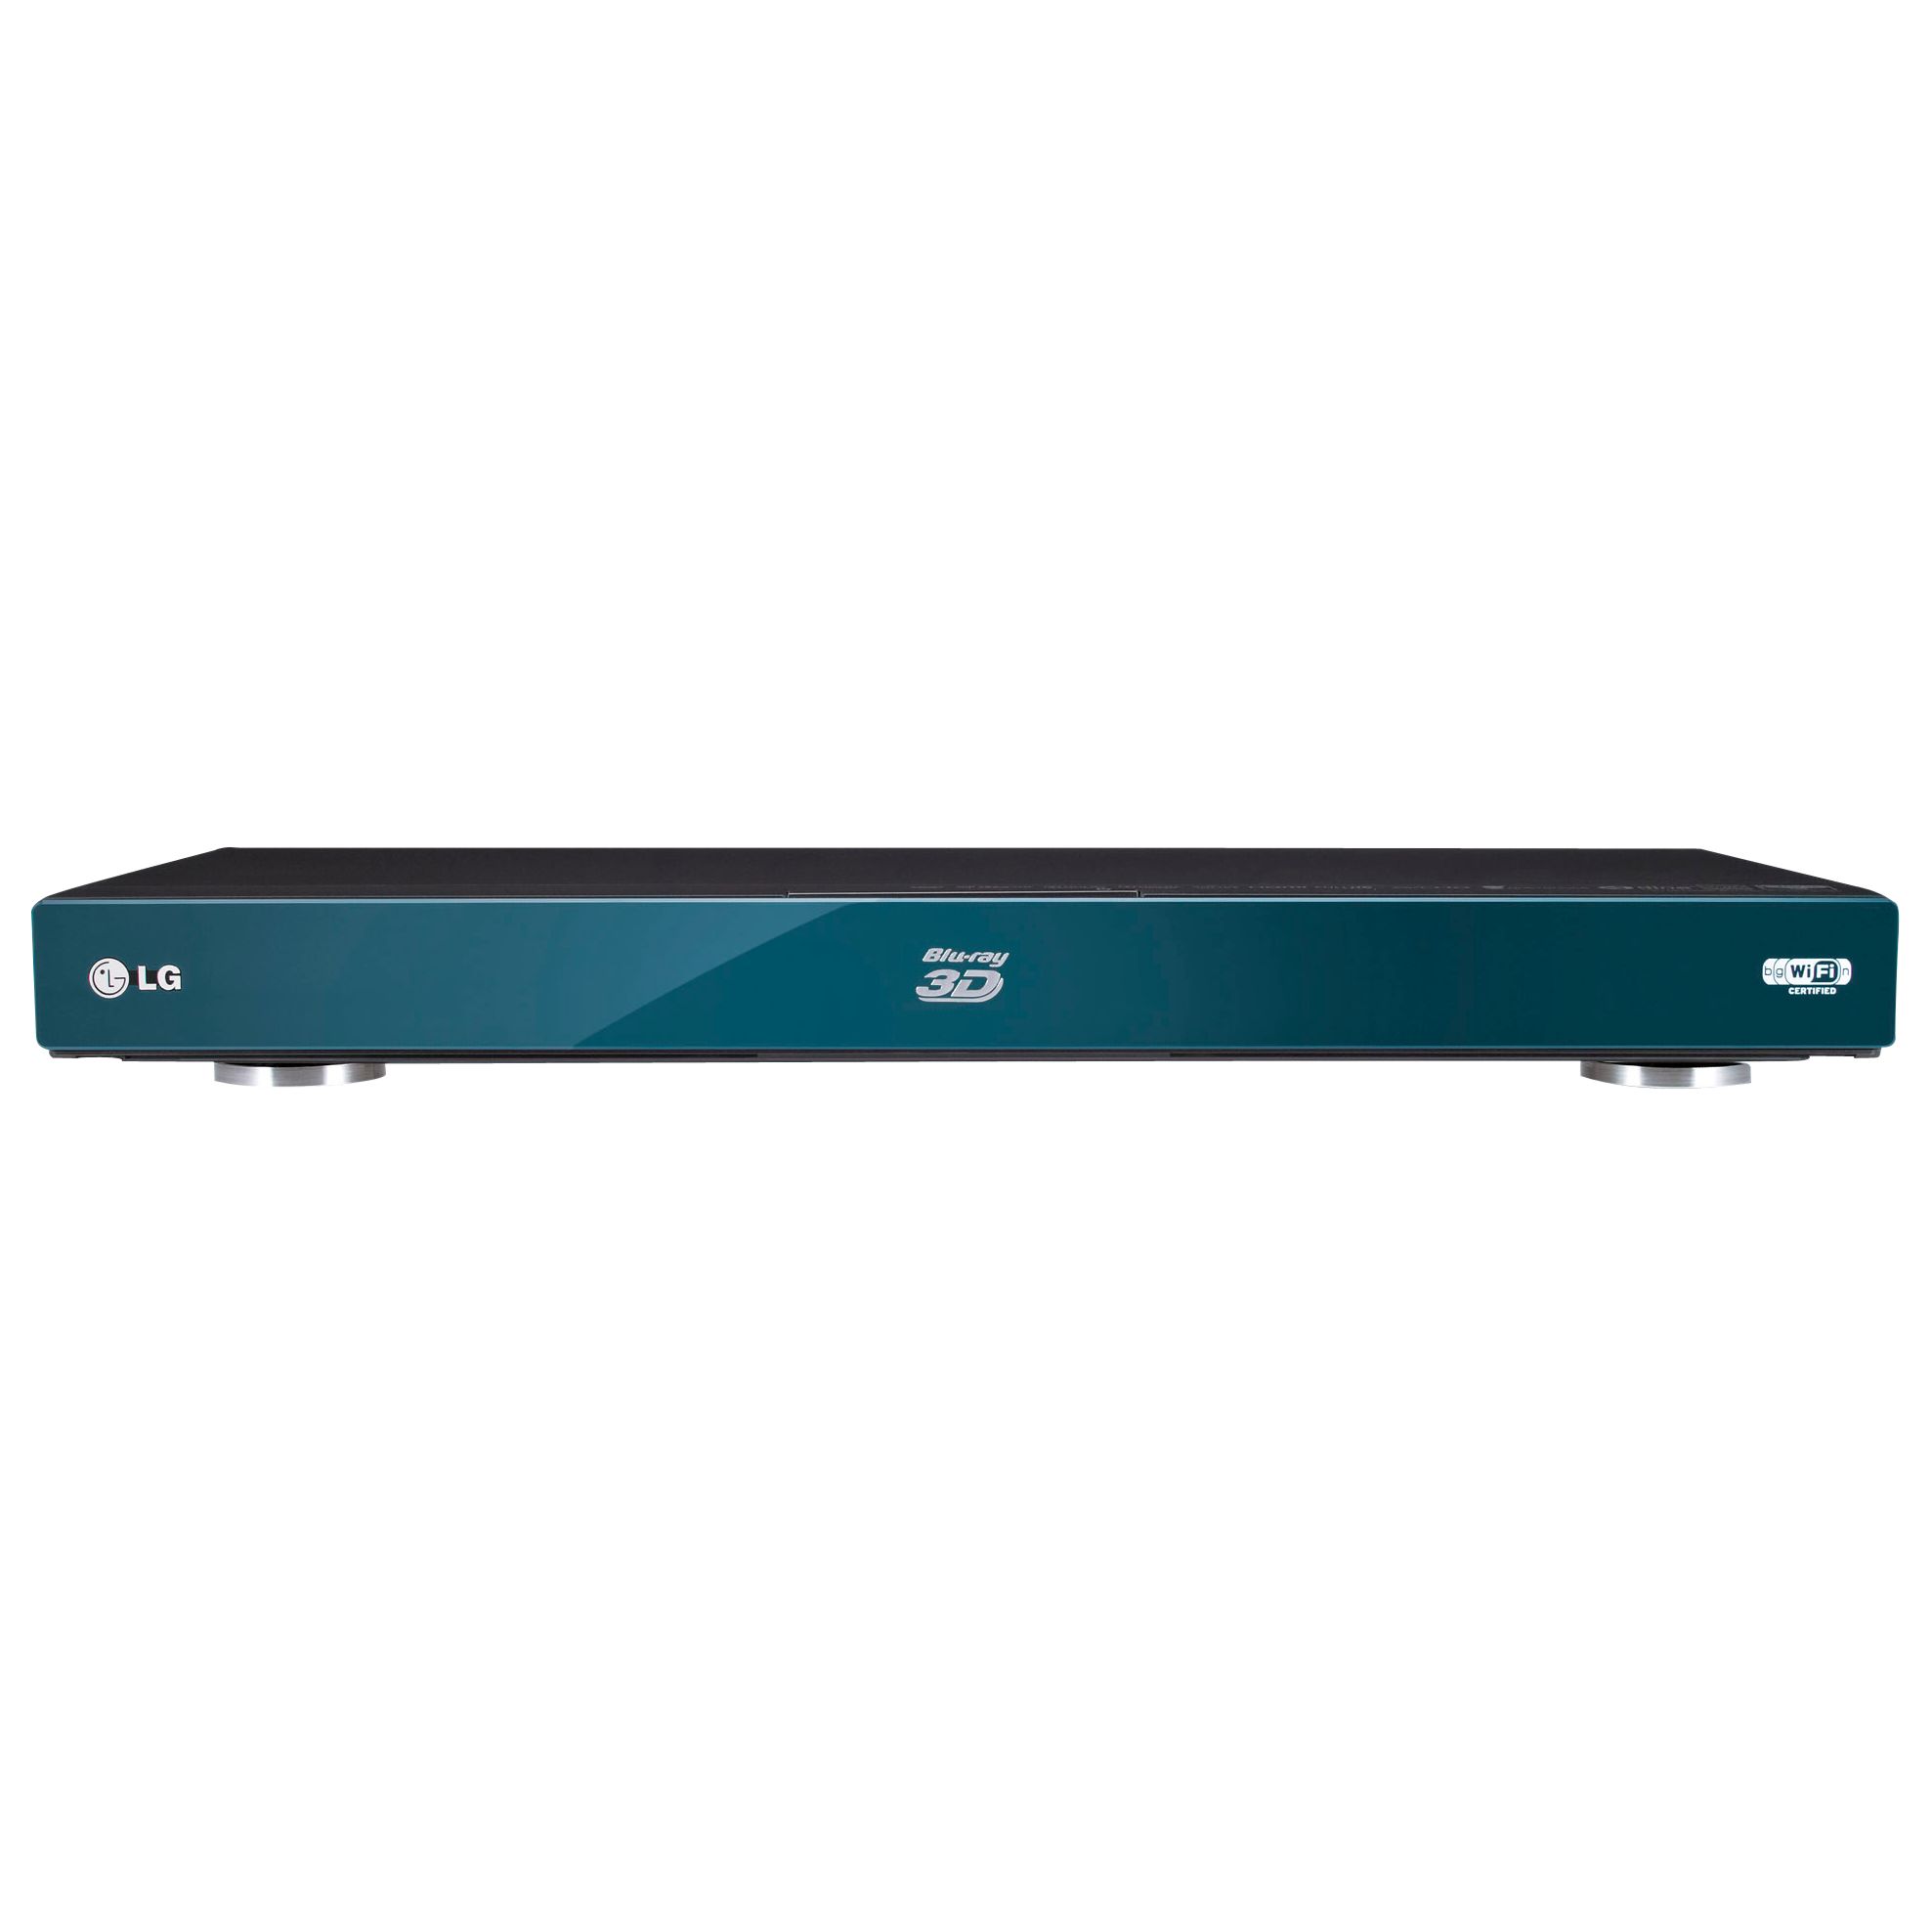 LG BX-580 3D Ready Blu-ray Disc Player at JohnLewis